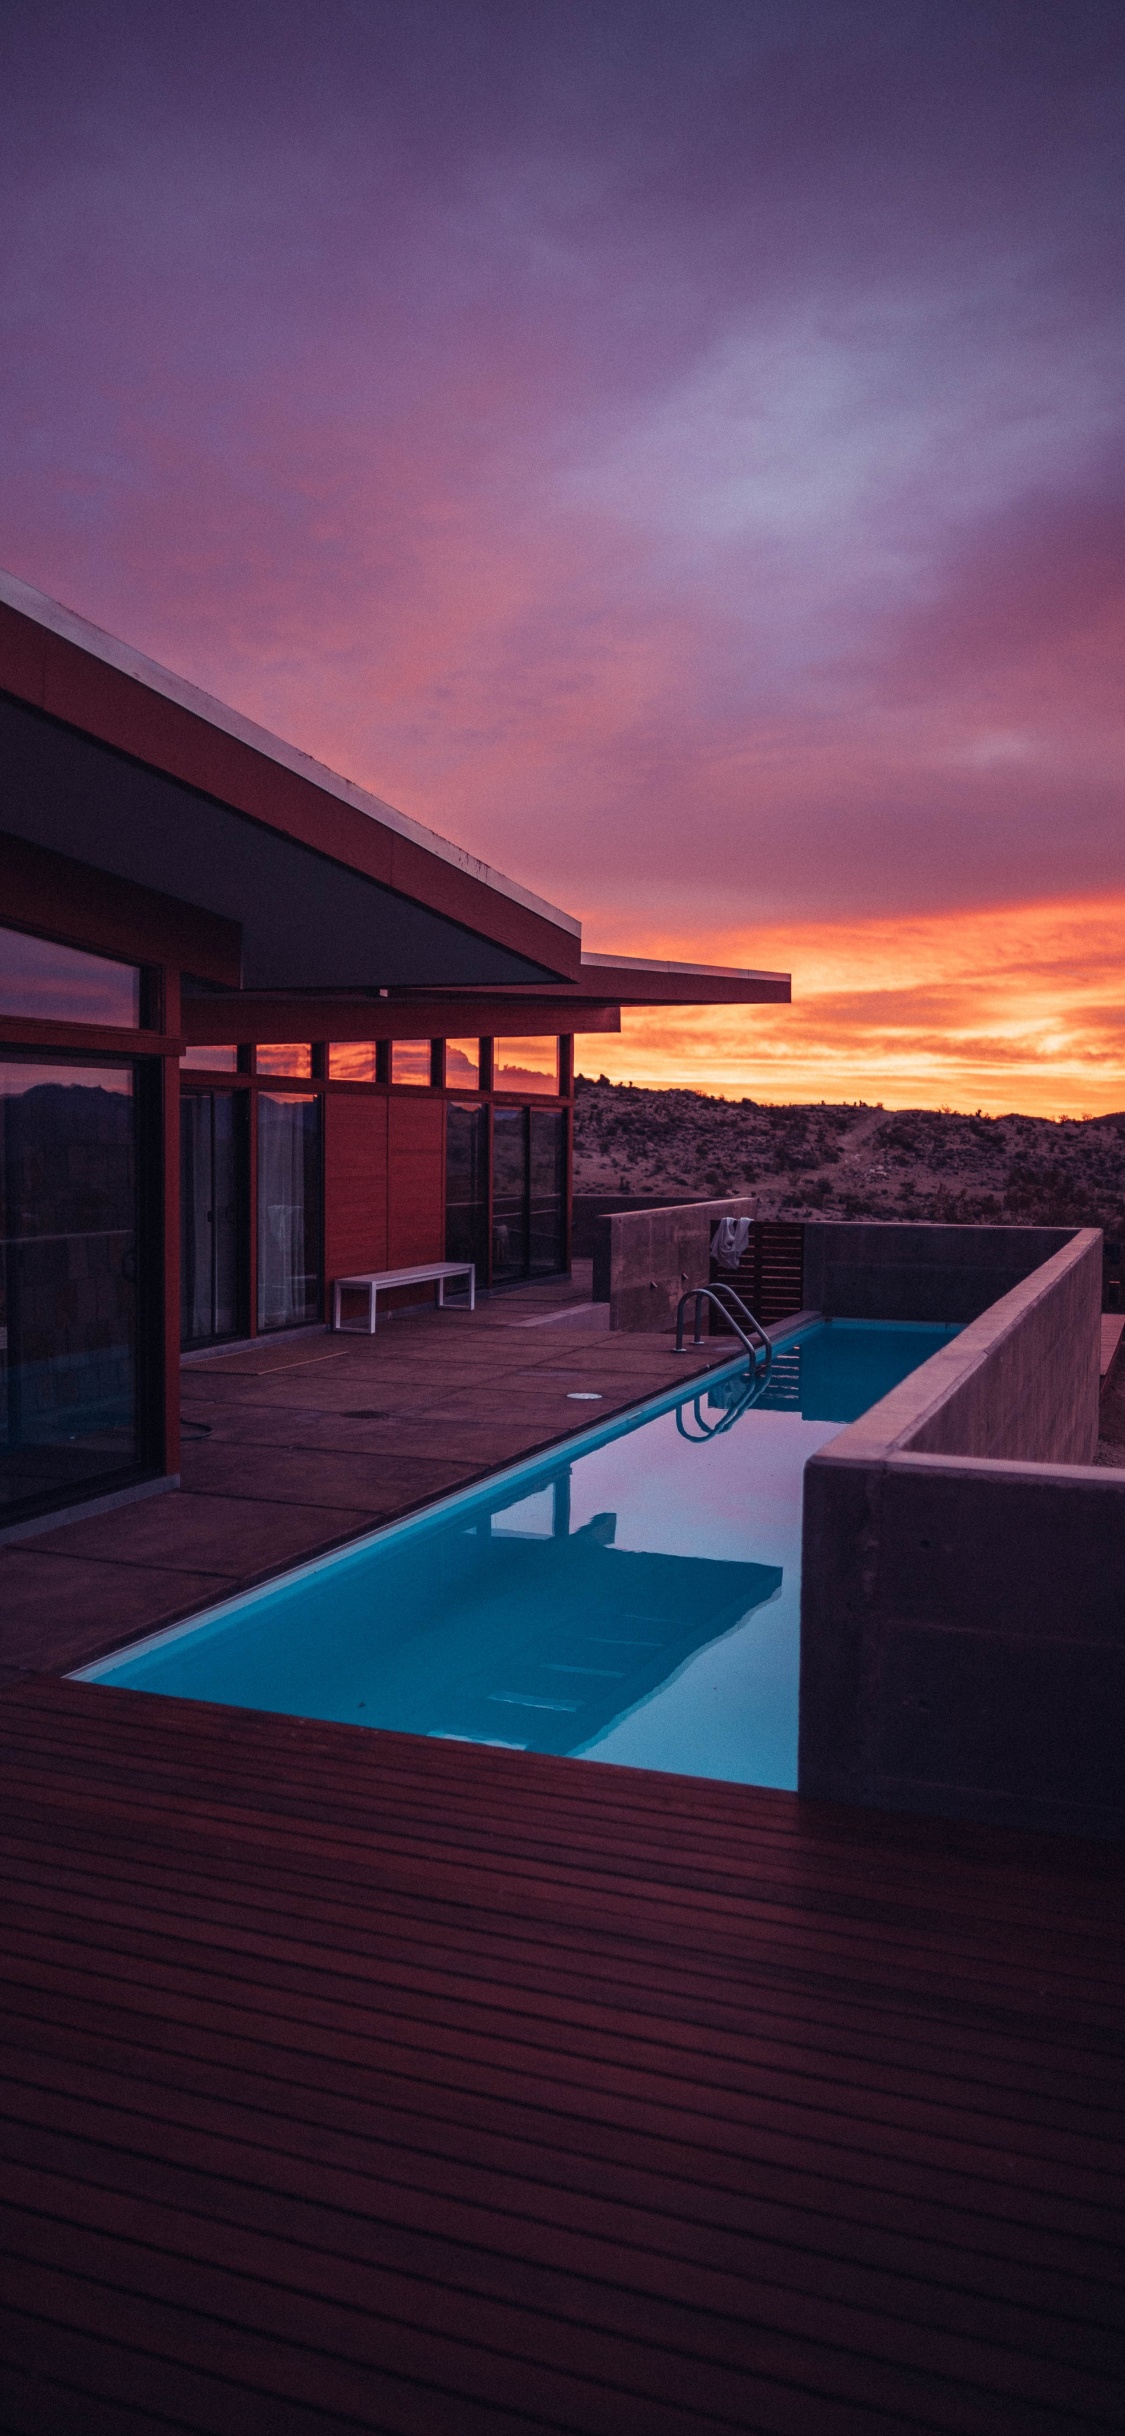 Swimming Pool Near Brown Wooden House During Sunset. Wallpaper in 1125x2436 Resolution